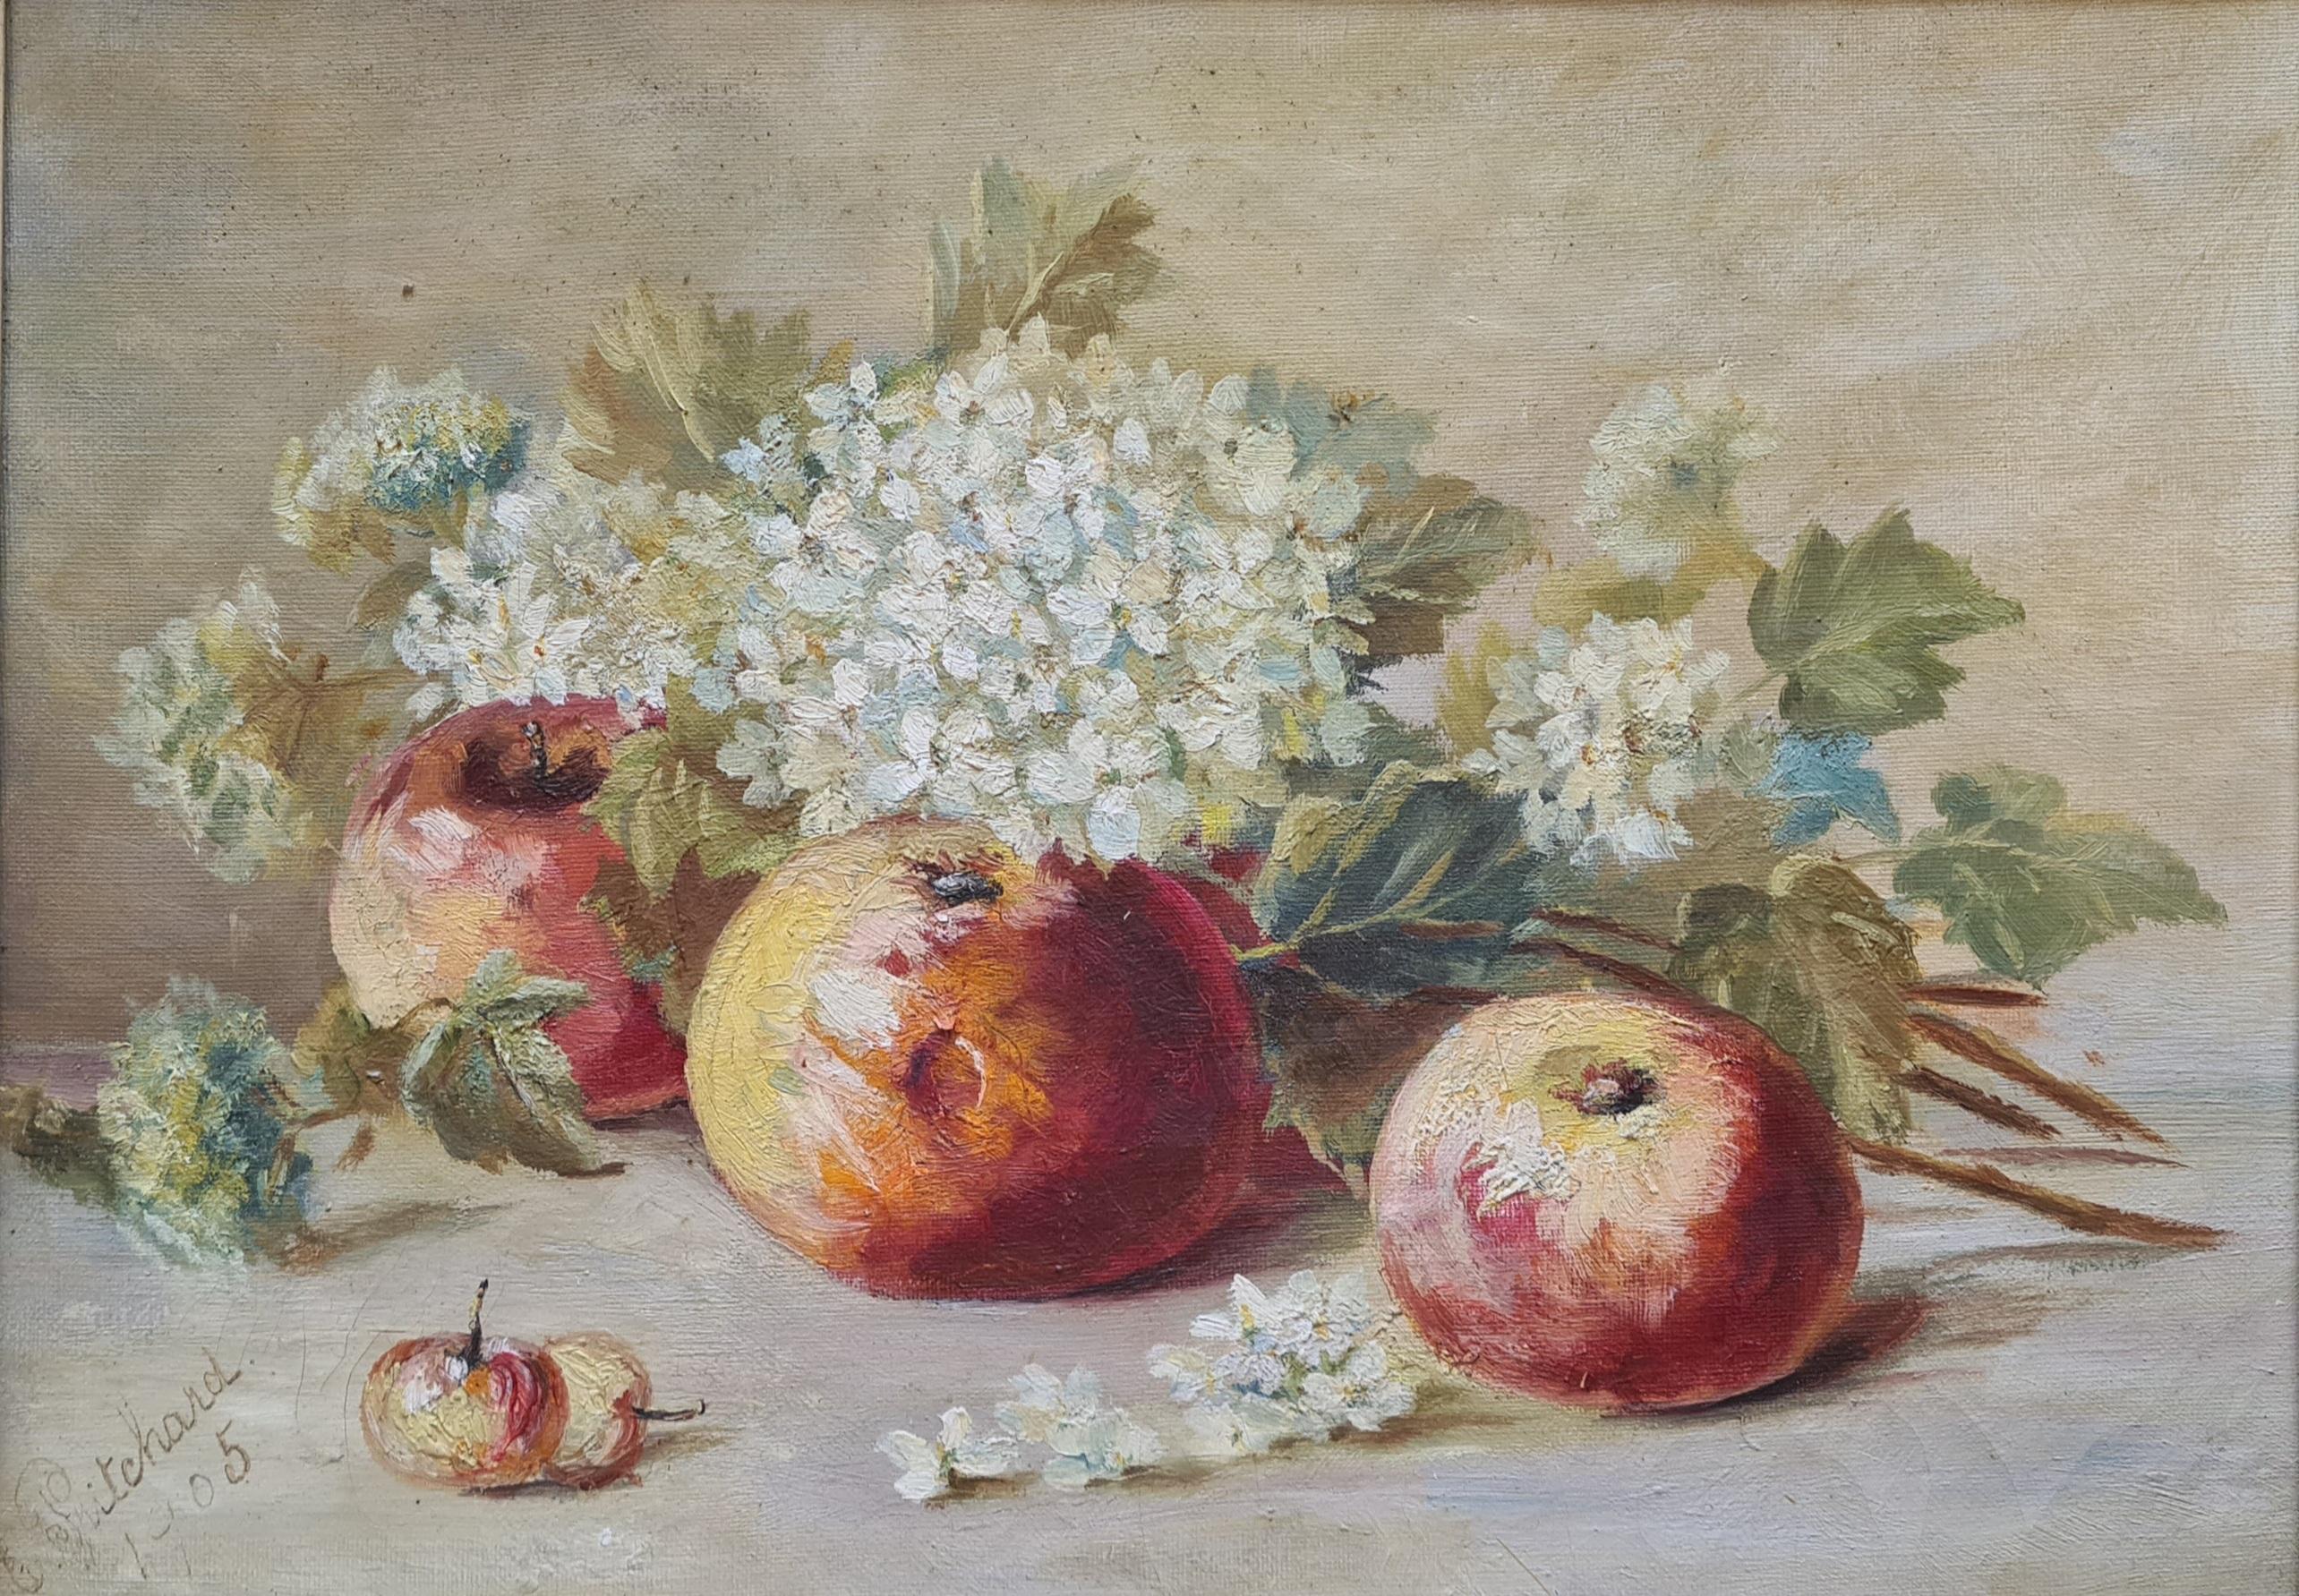 E Pritchard Interior Painting - Early 20thC Oil Still Life, Summer Harvest with Apples, Cherries and Blossom